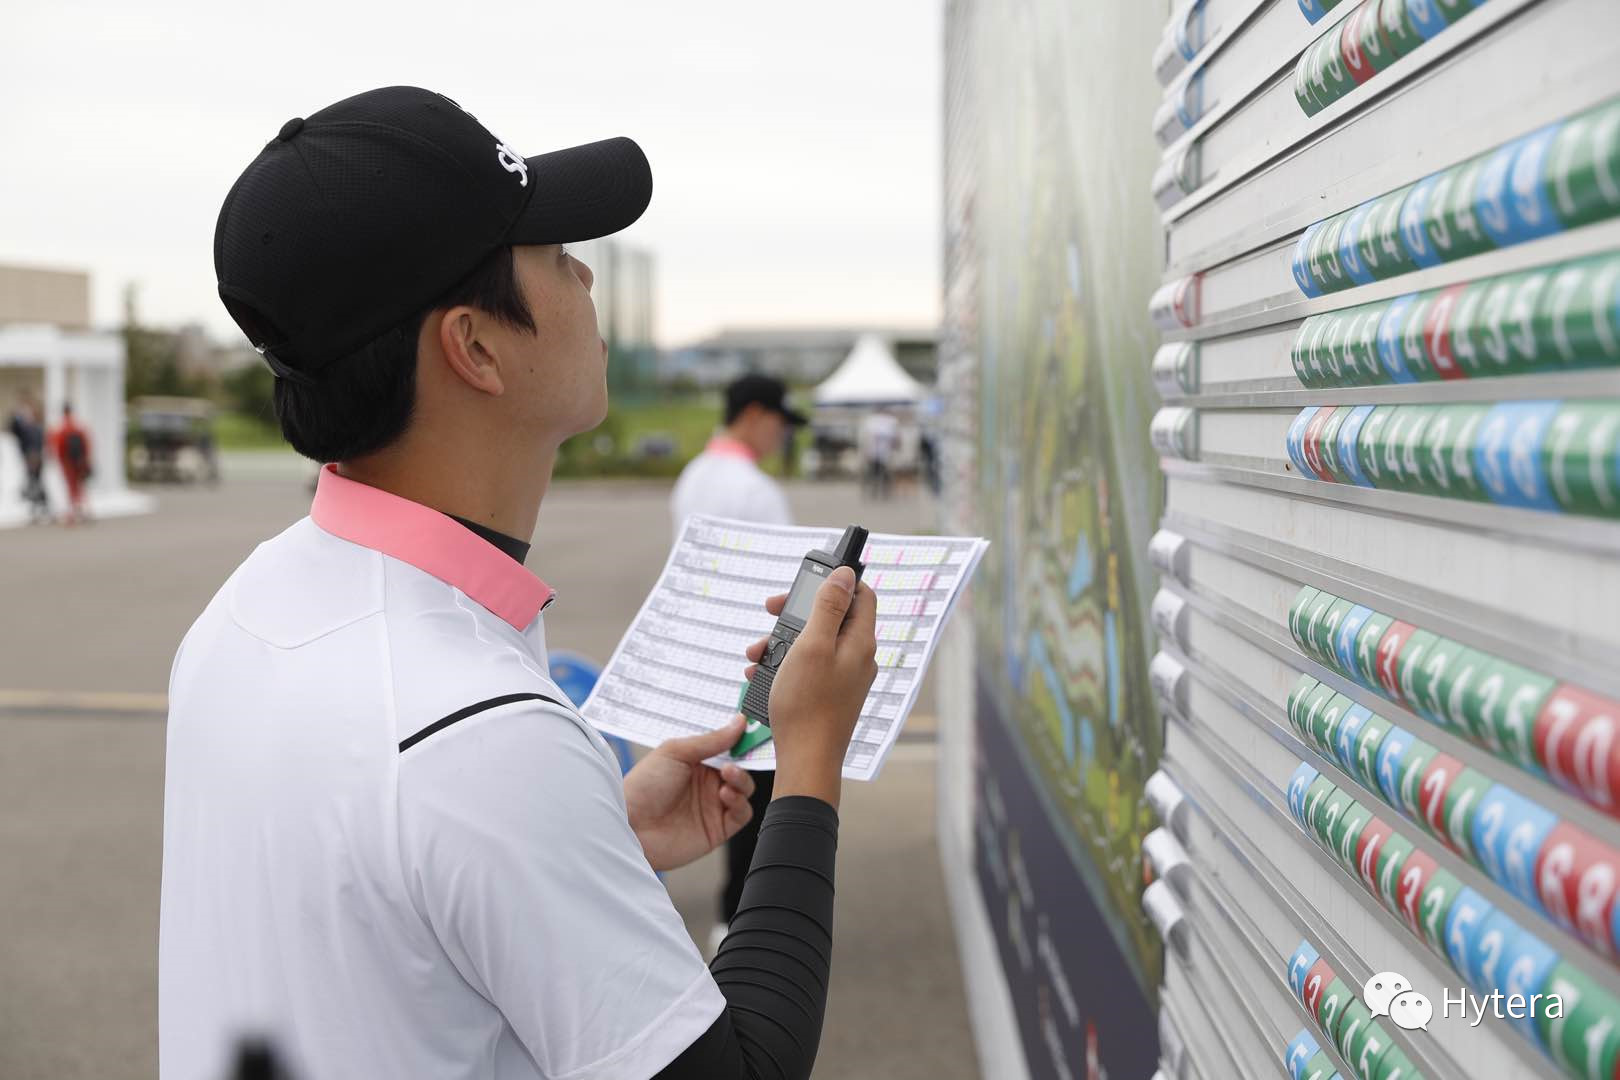 Hytera-PoC-Solution-Adopted-at-the-35th-Shinhan-Donghae-Golf-Open-2.jpg#asset:27500